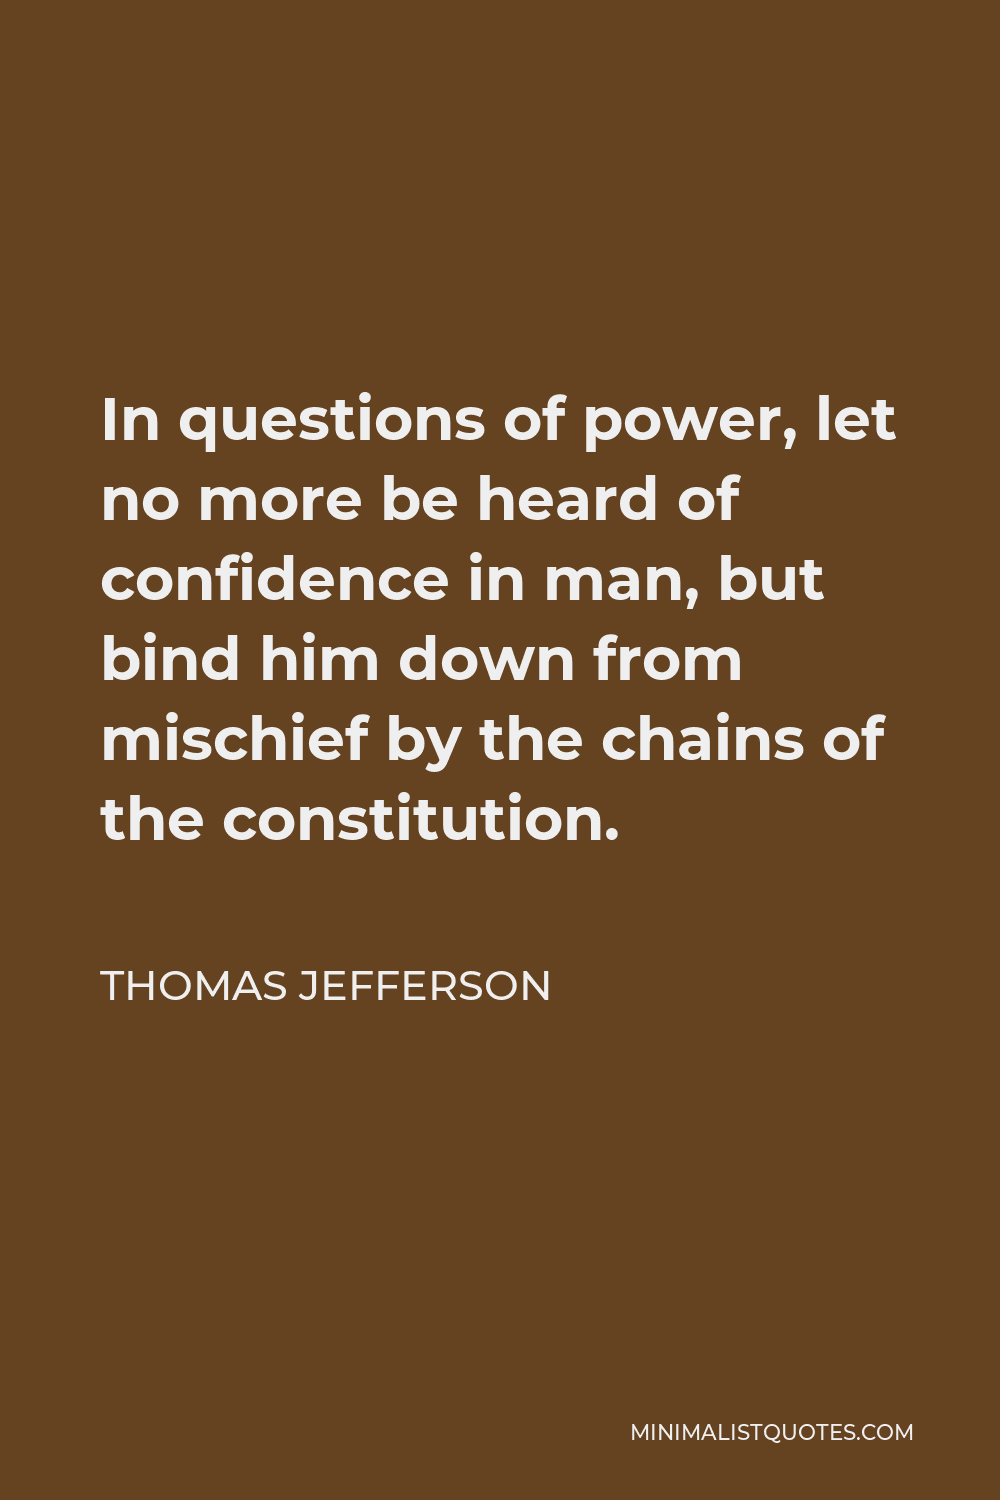 Thomas Jefferson Quote - In questions of power, let no more be heard of confidence in man, but bind him down from mischief by the chains of the constitution.